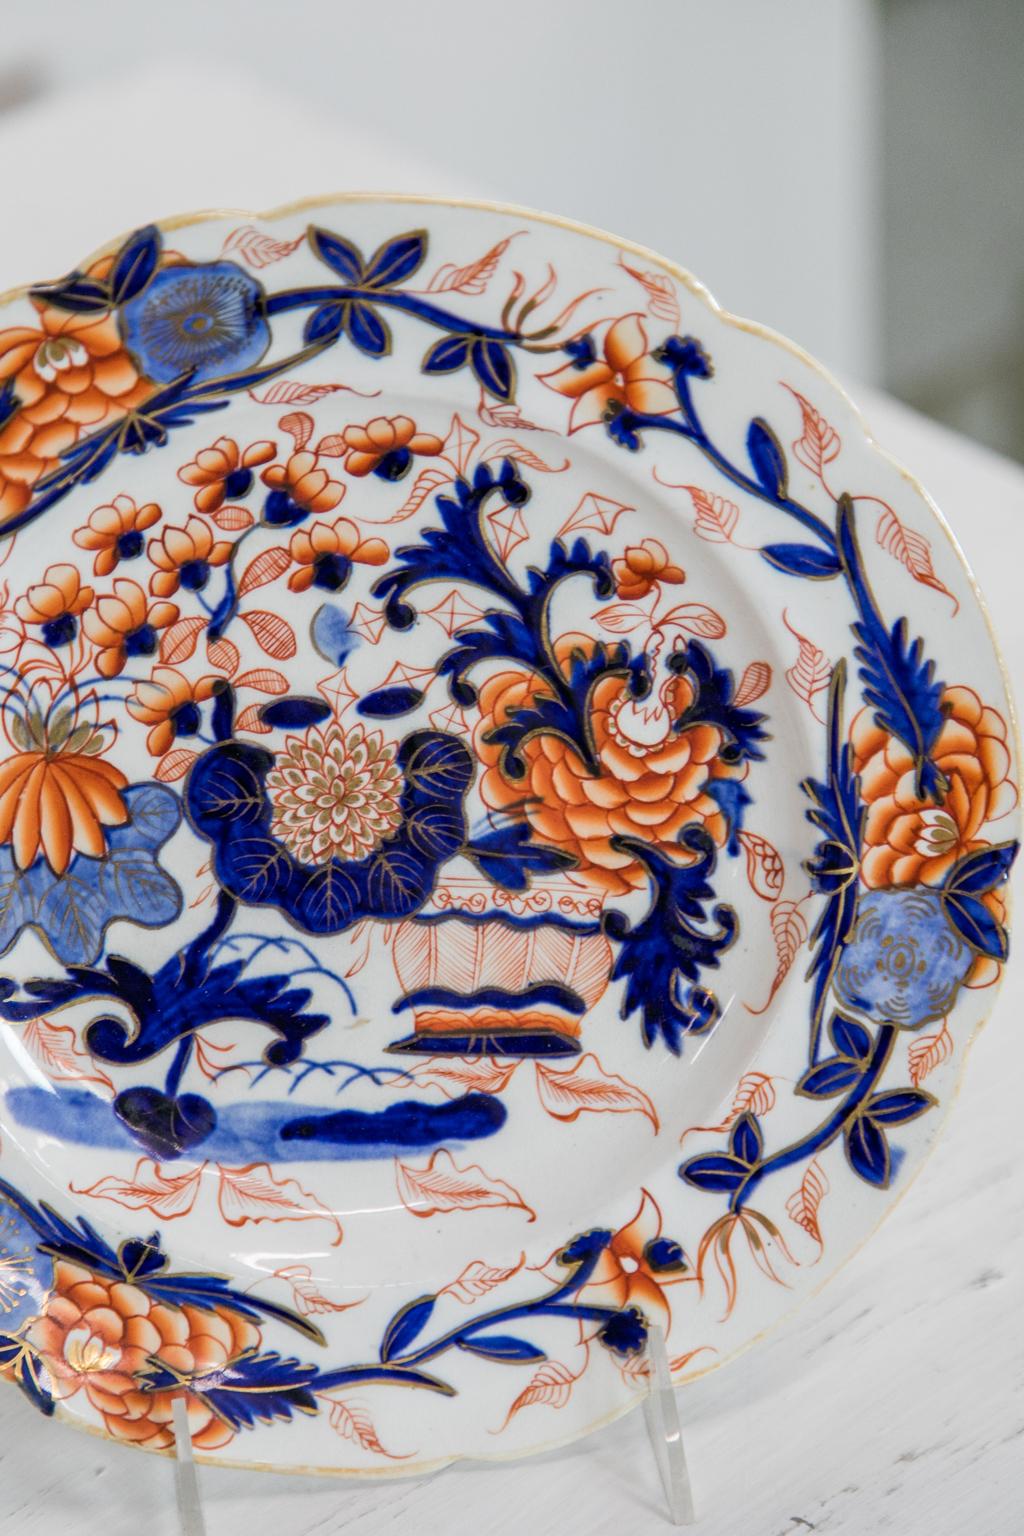 This set of eight Staffordshire plates are decorated with stylized flowers, leaves, and urns. There are gilt highlights that have wear in some areas. There are no markings, but the style of decoration, type of glaze, body composition, and elements